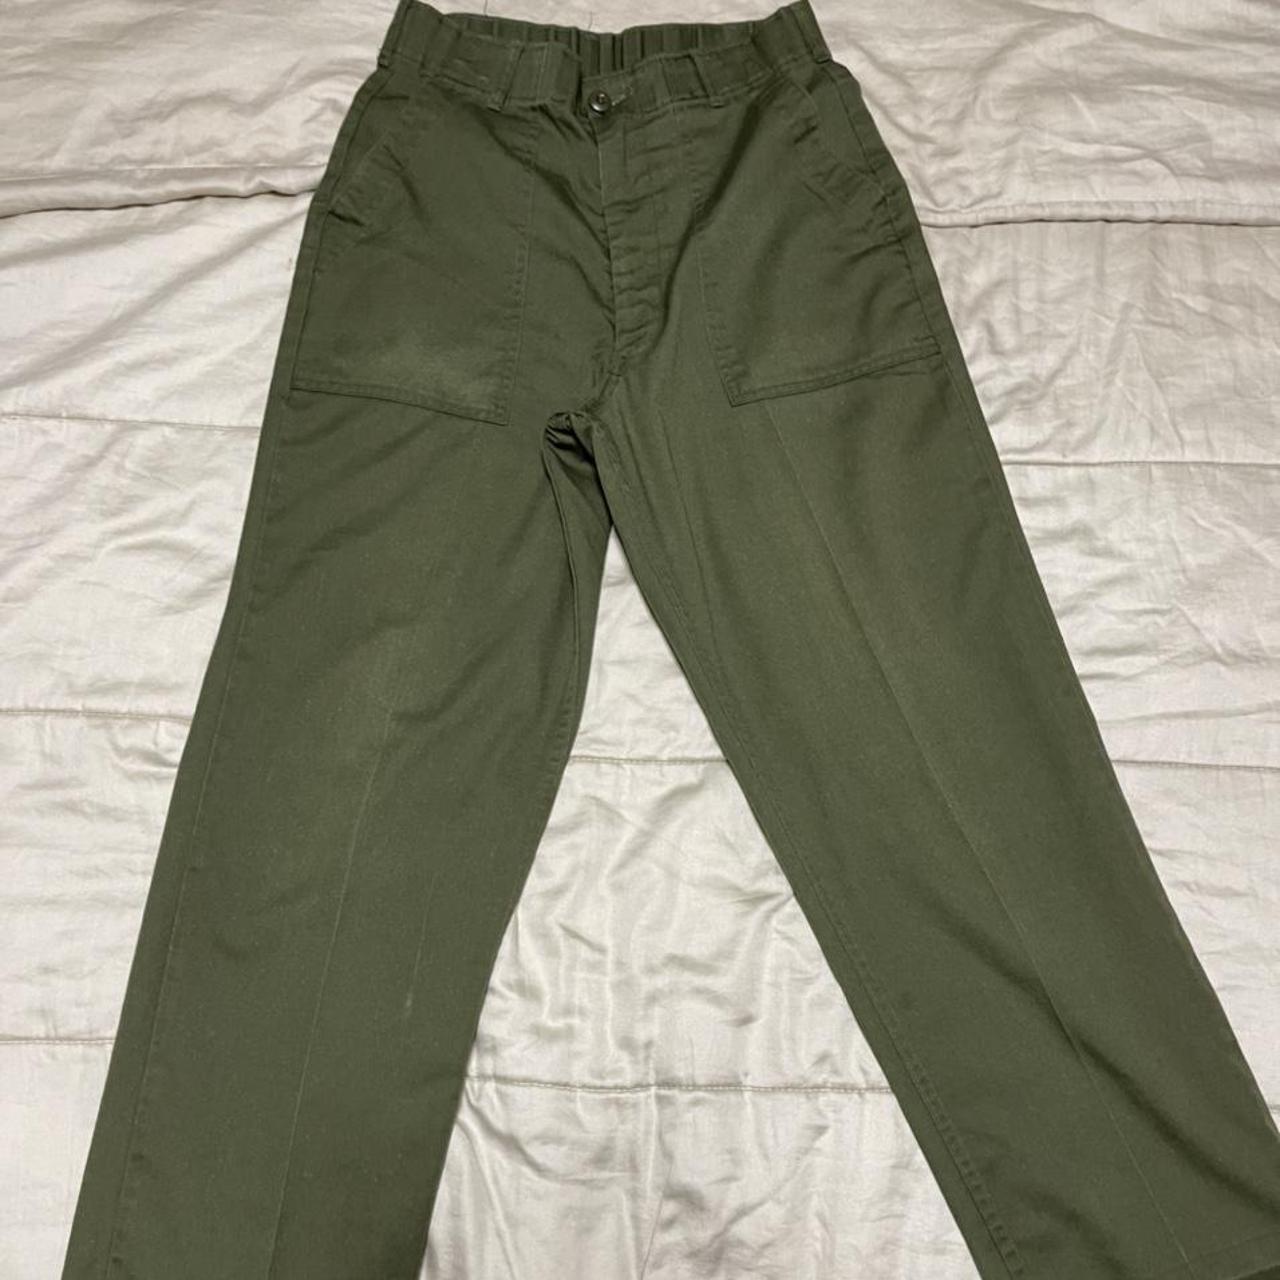 OG 507 Trousers recommended size: 29 x... - Depop